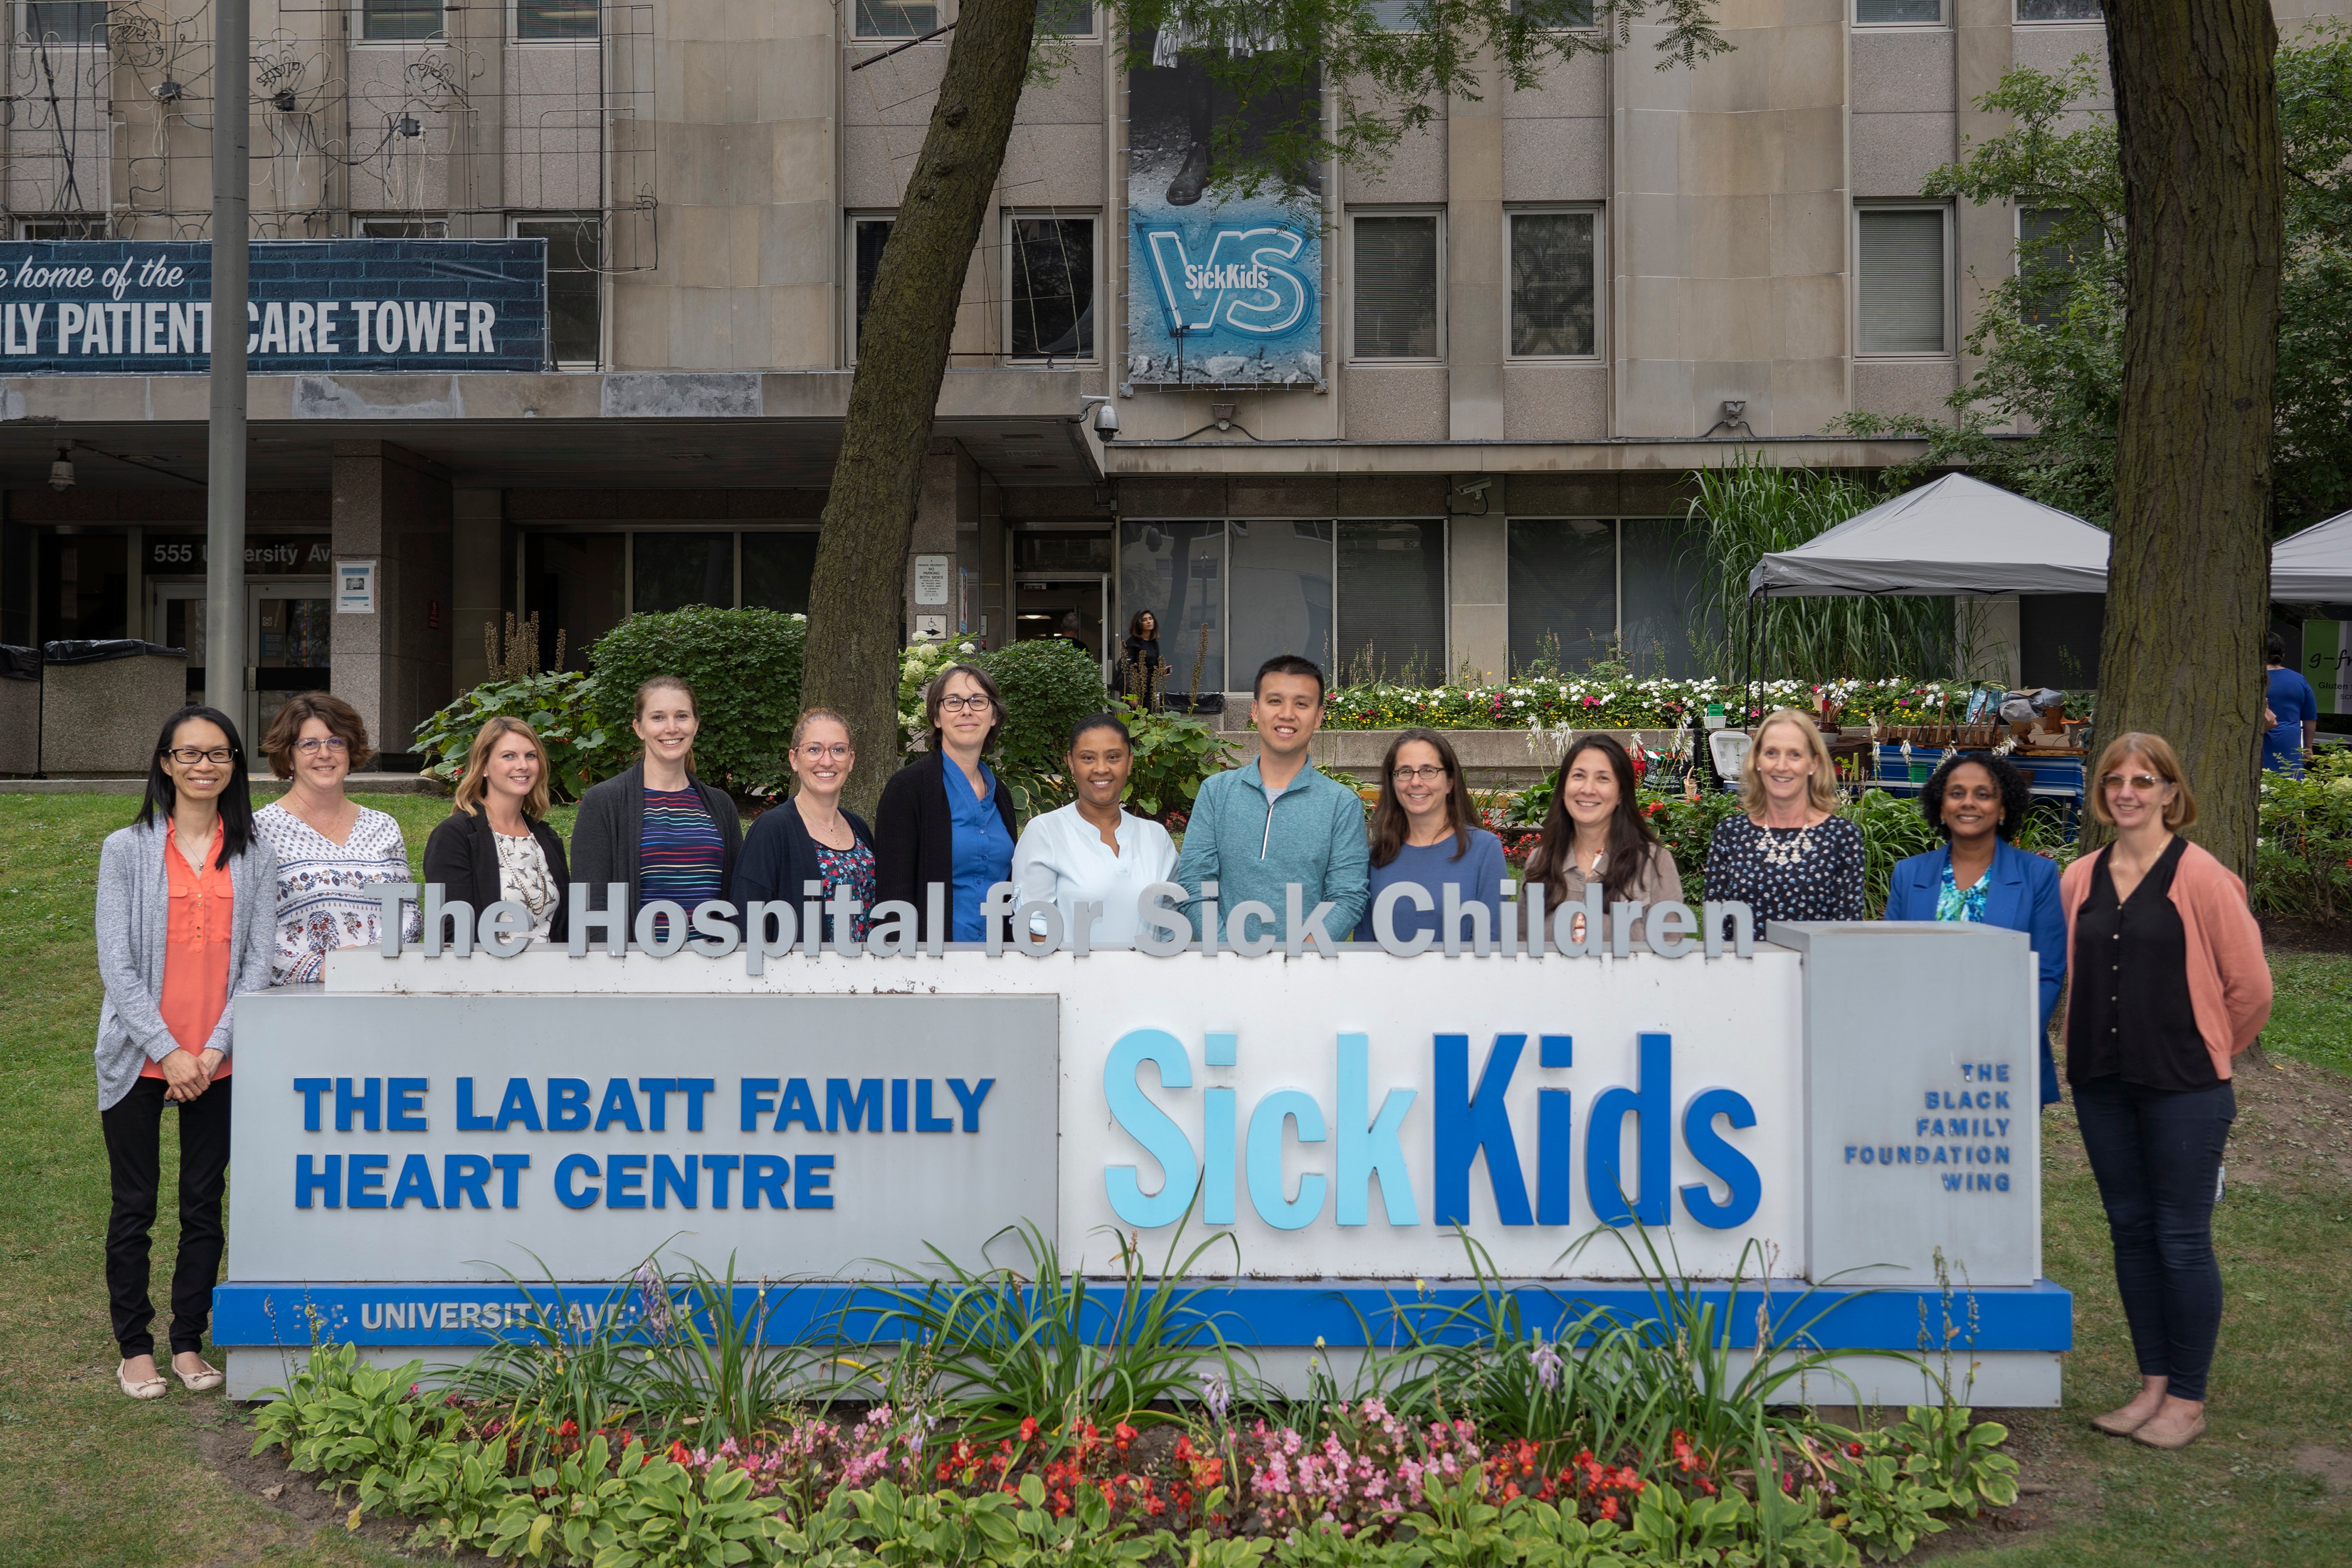 13 Division of Nephrology staff in front of the Hospital smiling for a team photo